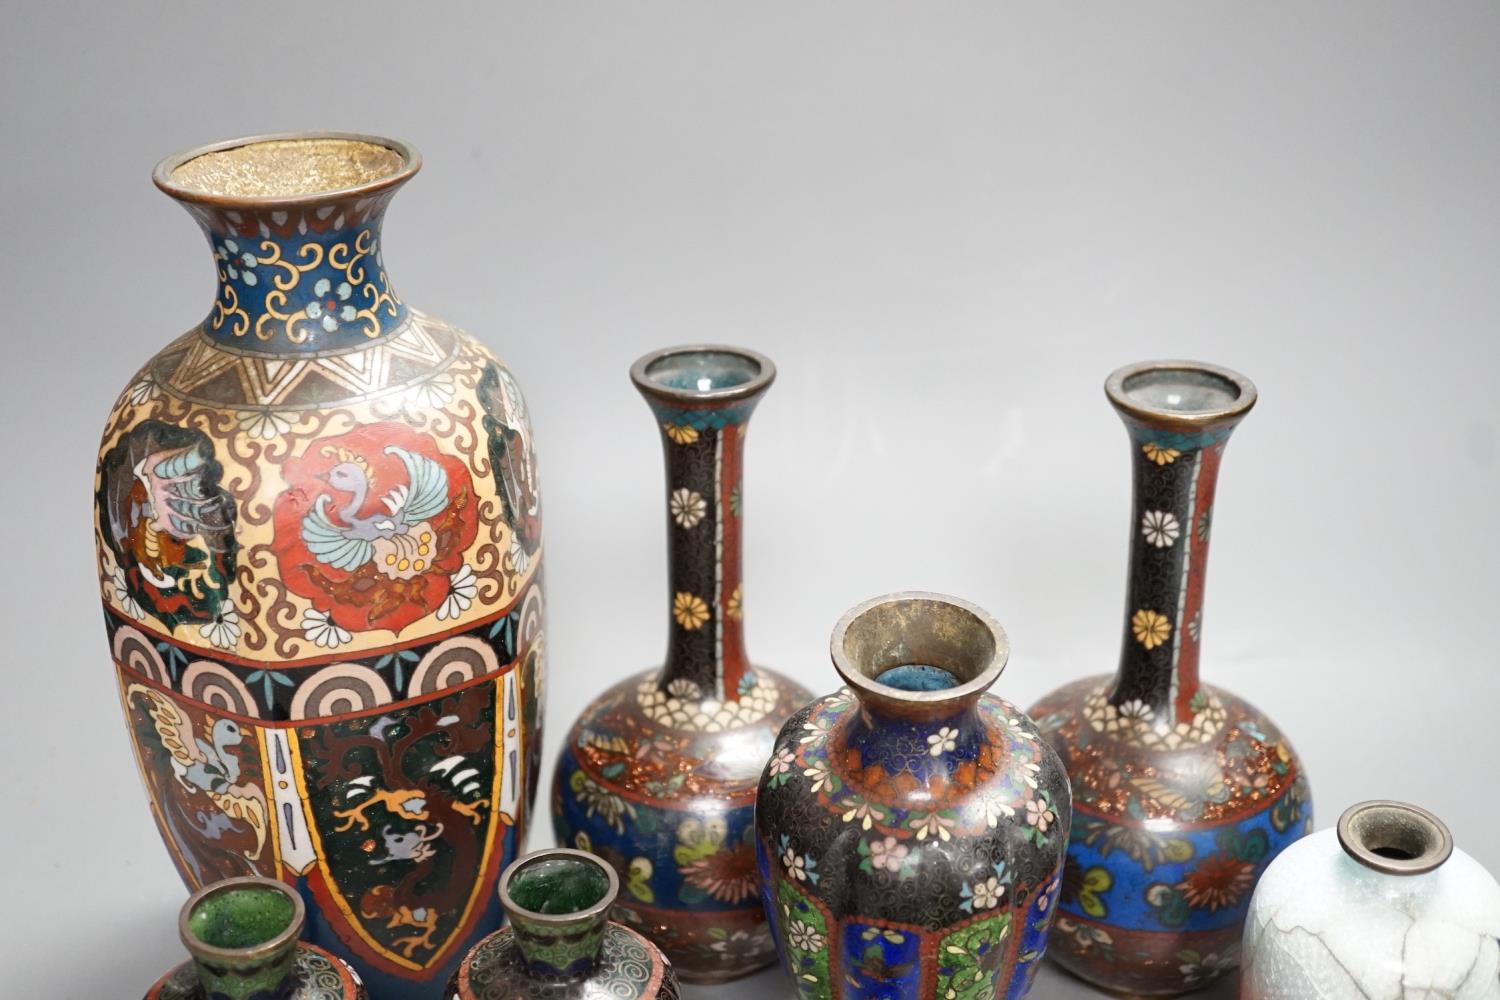 A group of Japanese cloisonné enamel vases and a teapot, Meji, 24cm high - Image 4 of 6